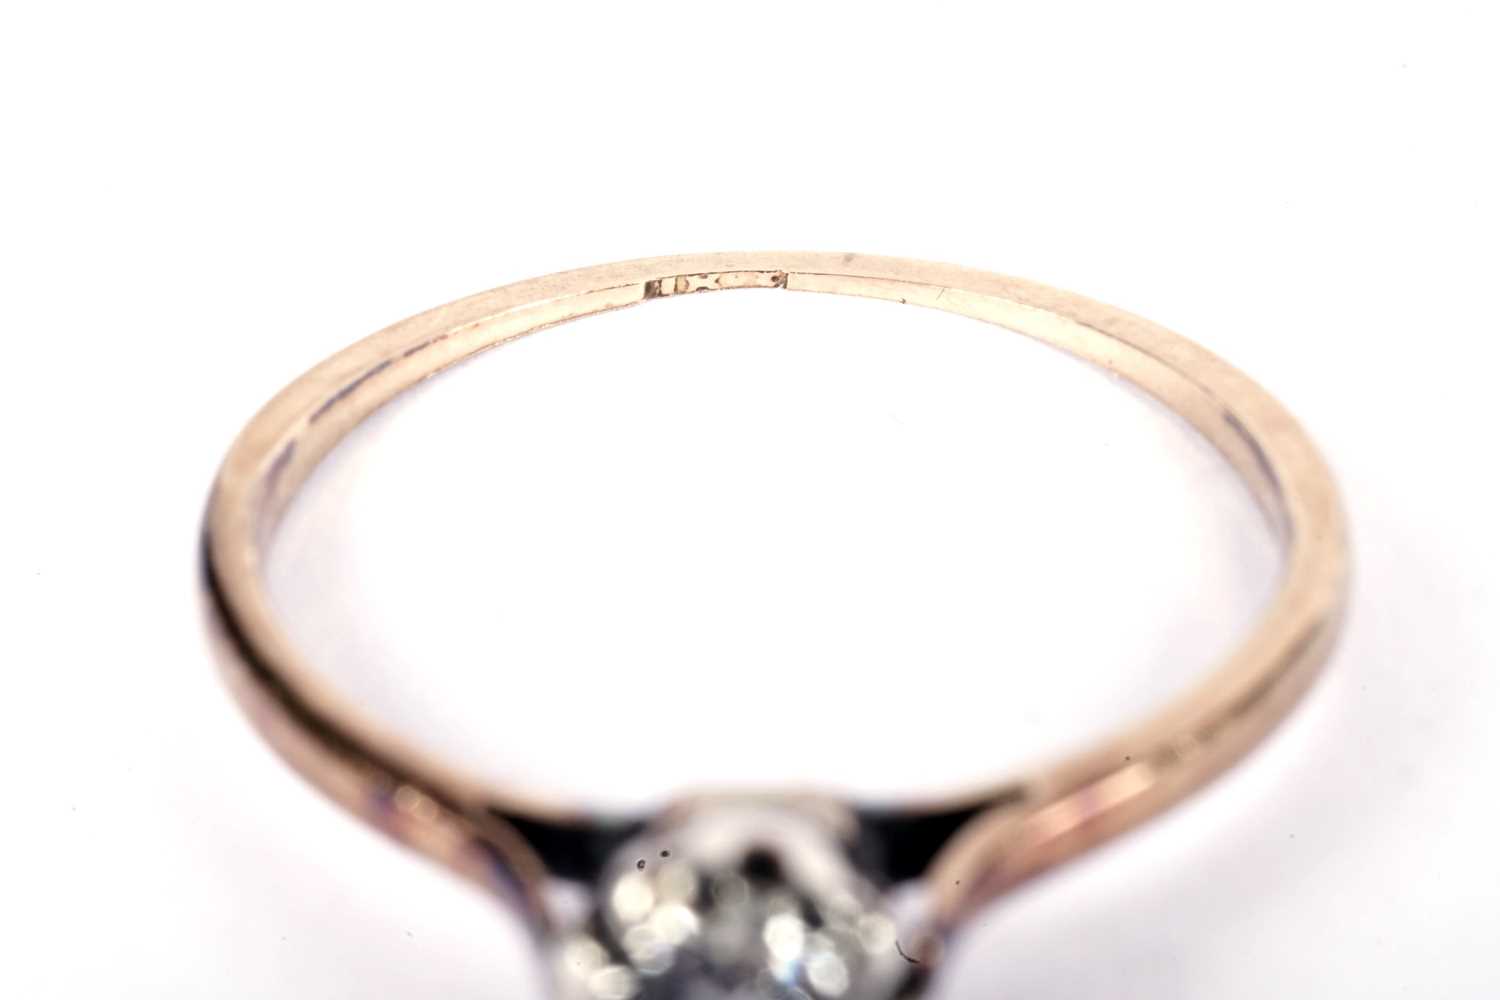 A single stone solitaire diamond ring - Image 3 of 3